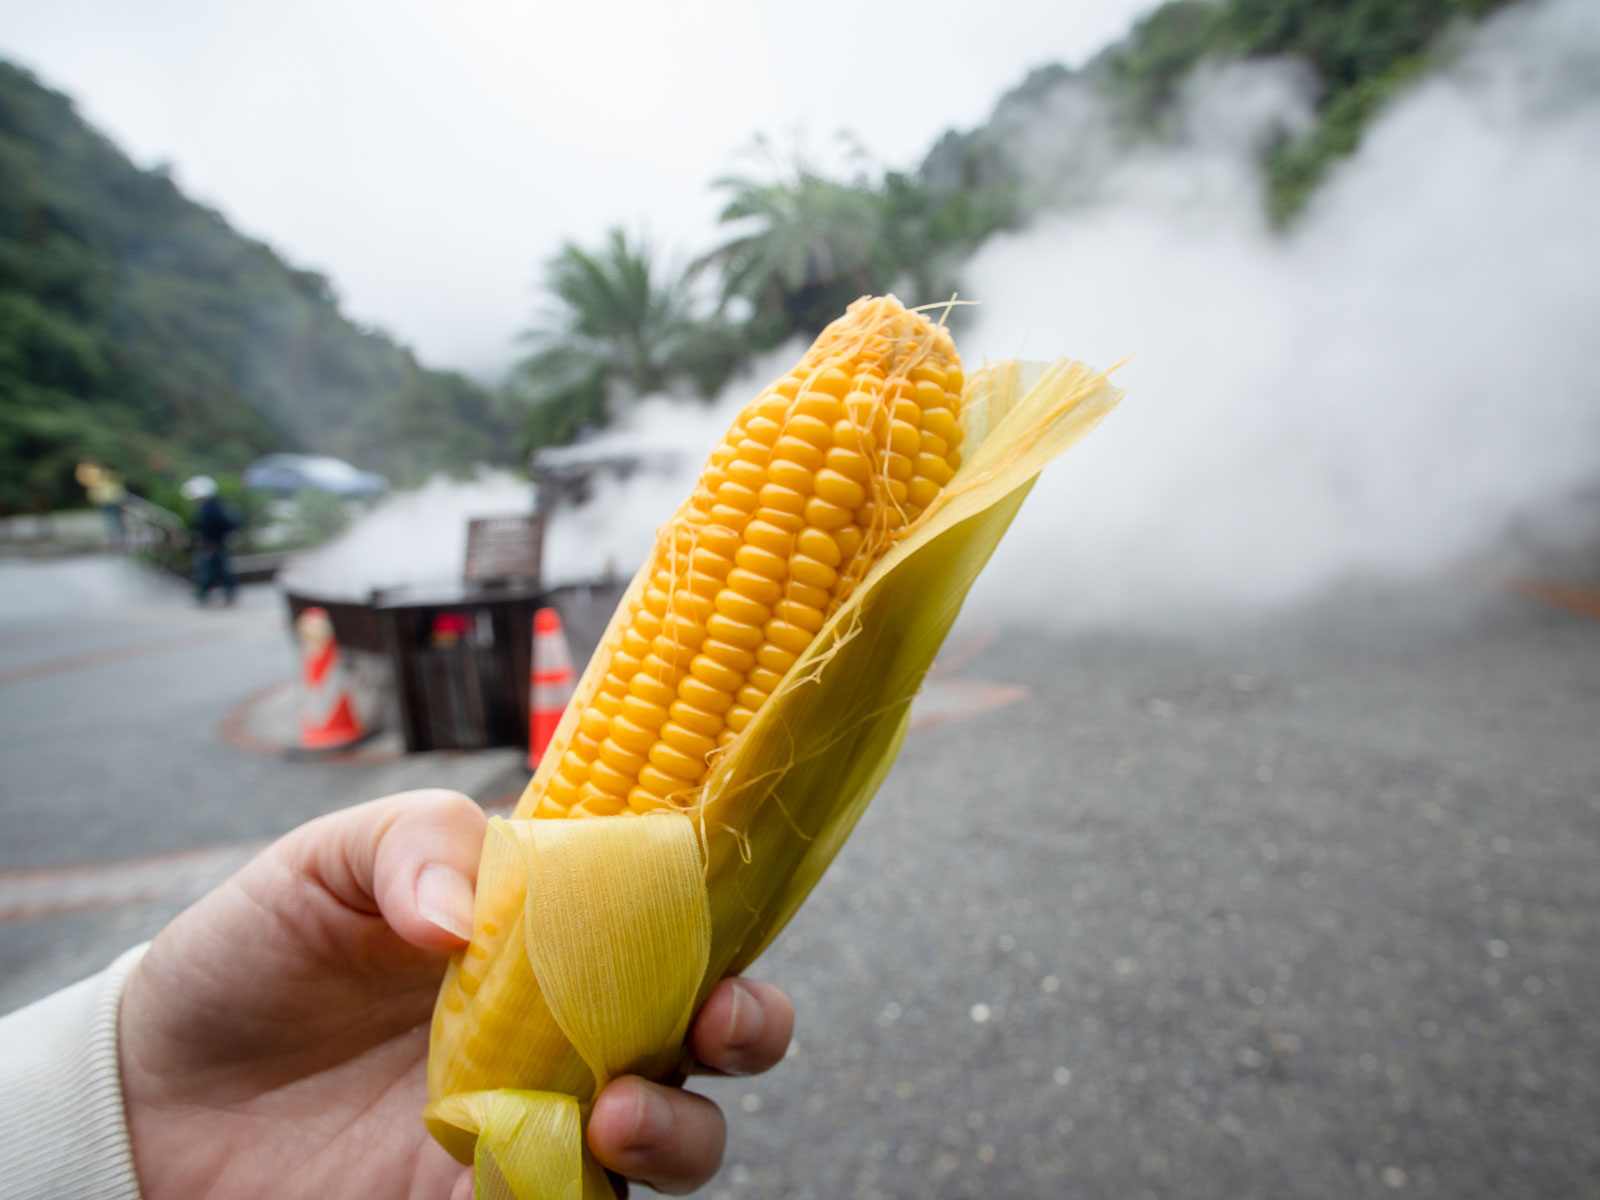 Boiled corn is shown; steam rises from a boiling pool of hot spring water in the background.